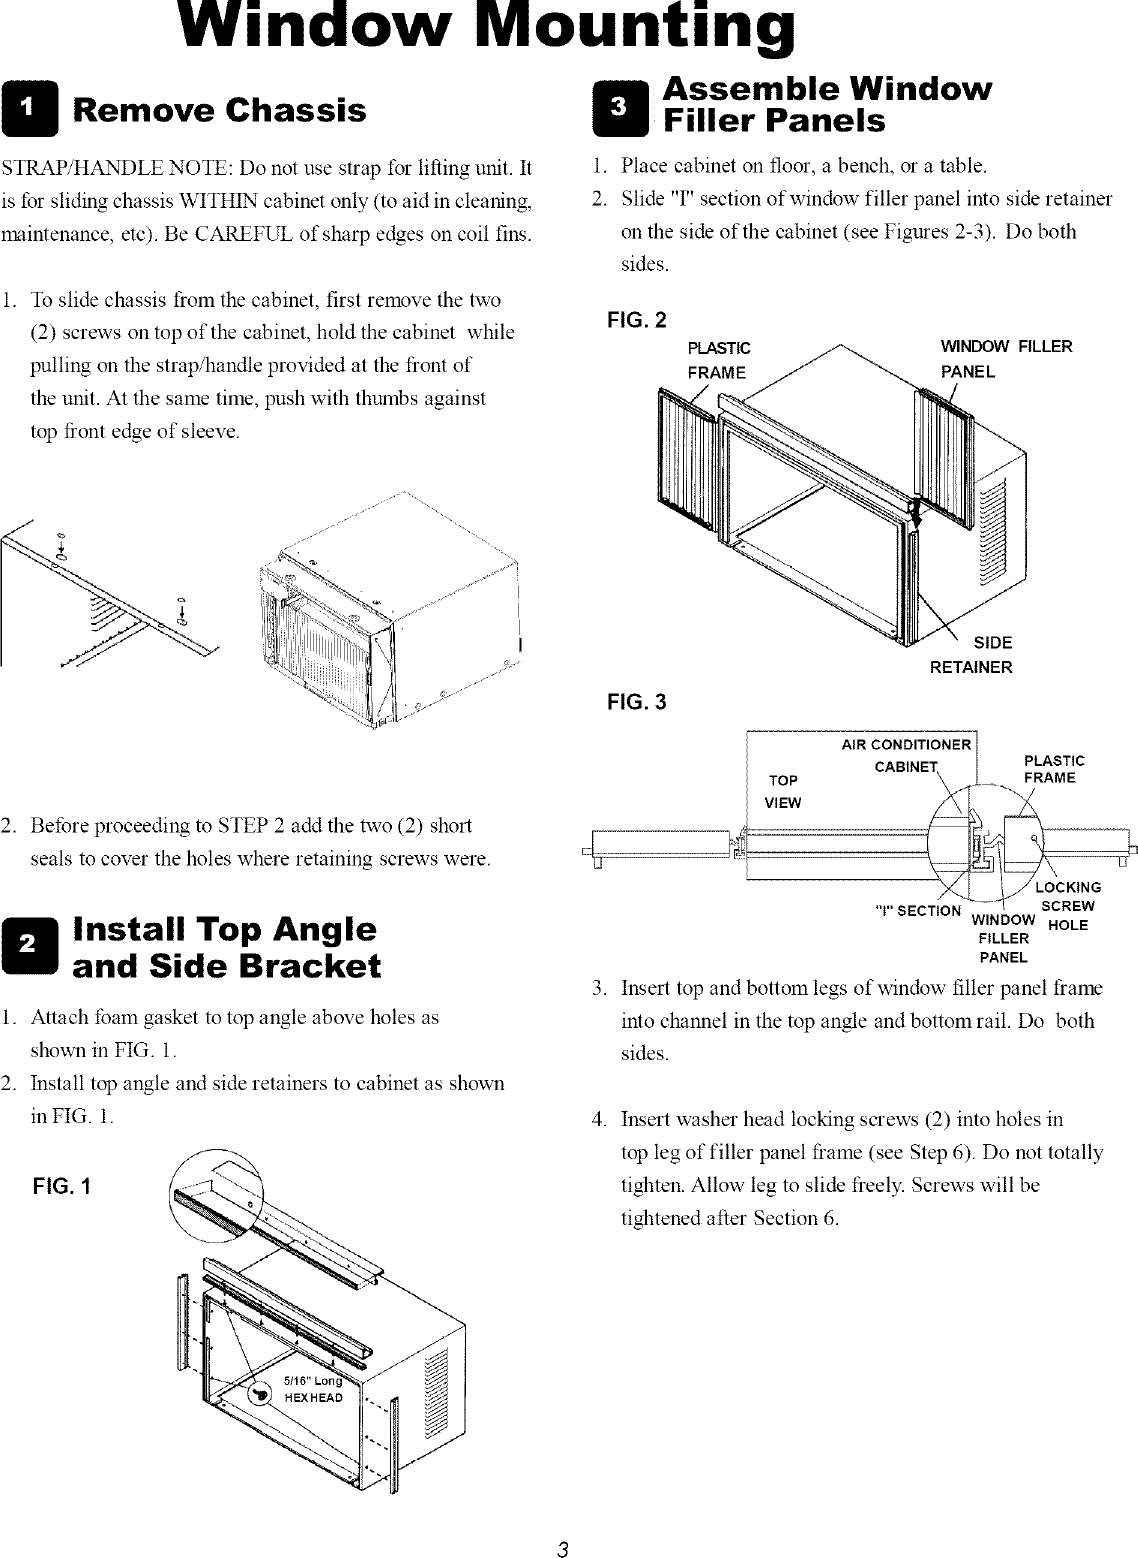 Page 3 of 8 - Frigidaire FAS156N1A2 User Manual  AIR CONDITIONER - Manuals And Guides L0523213